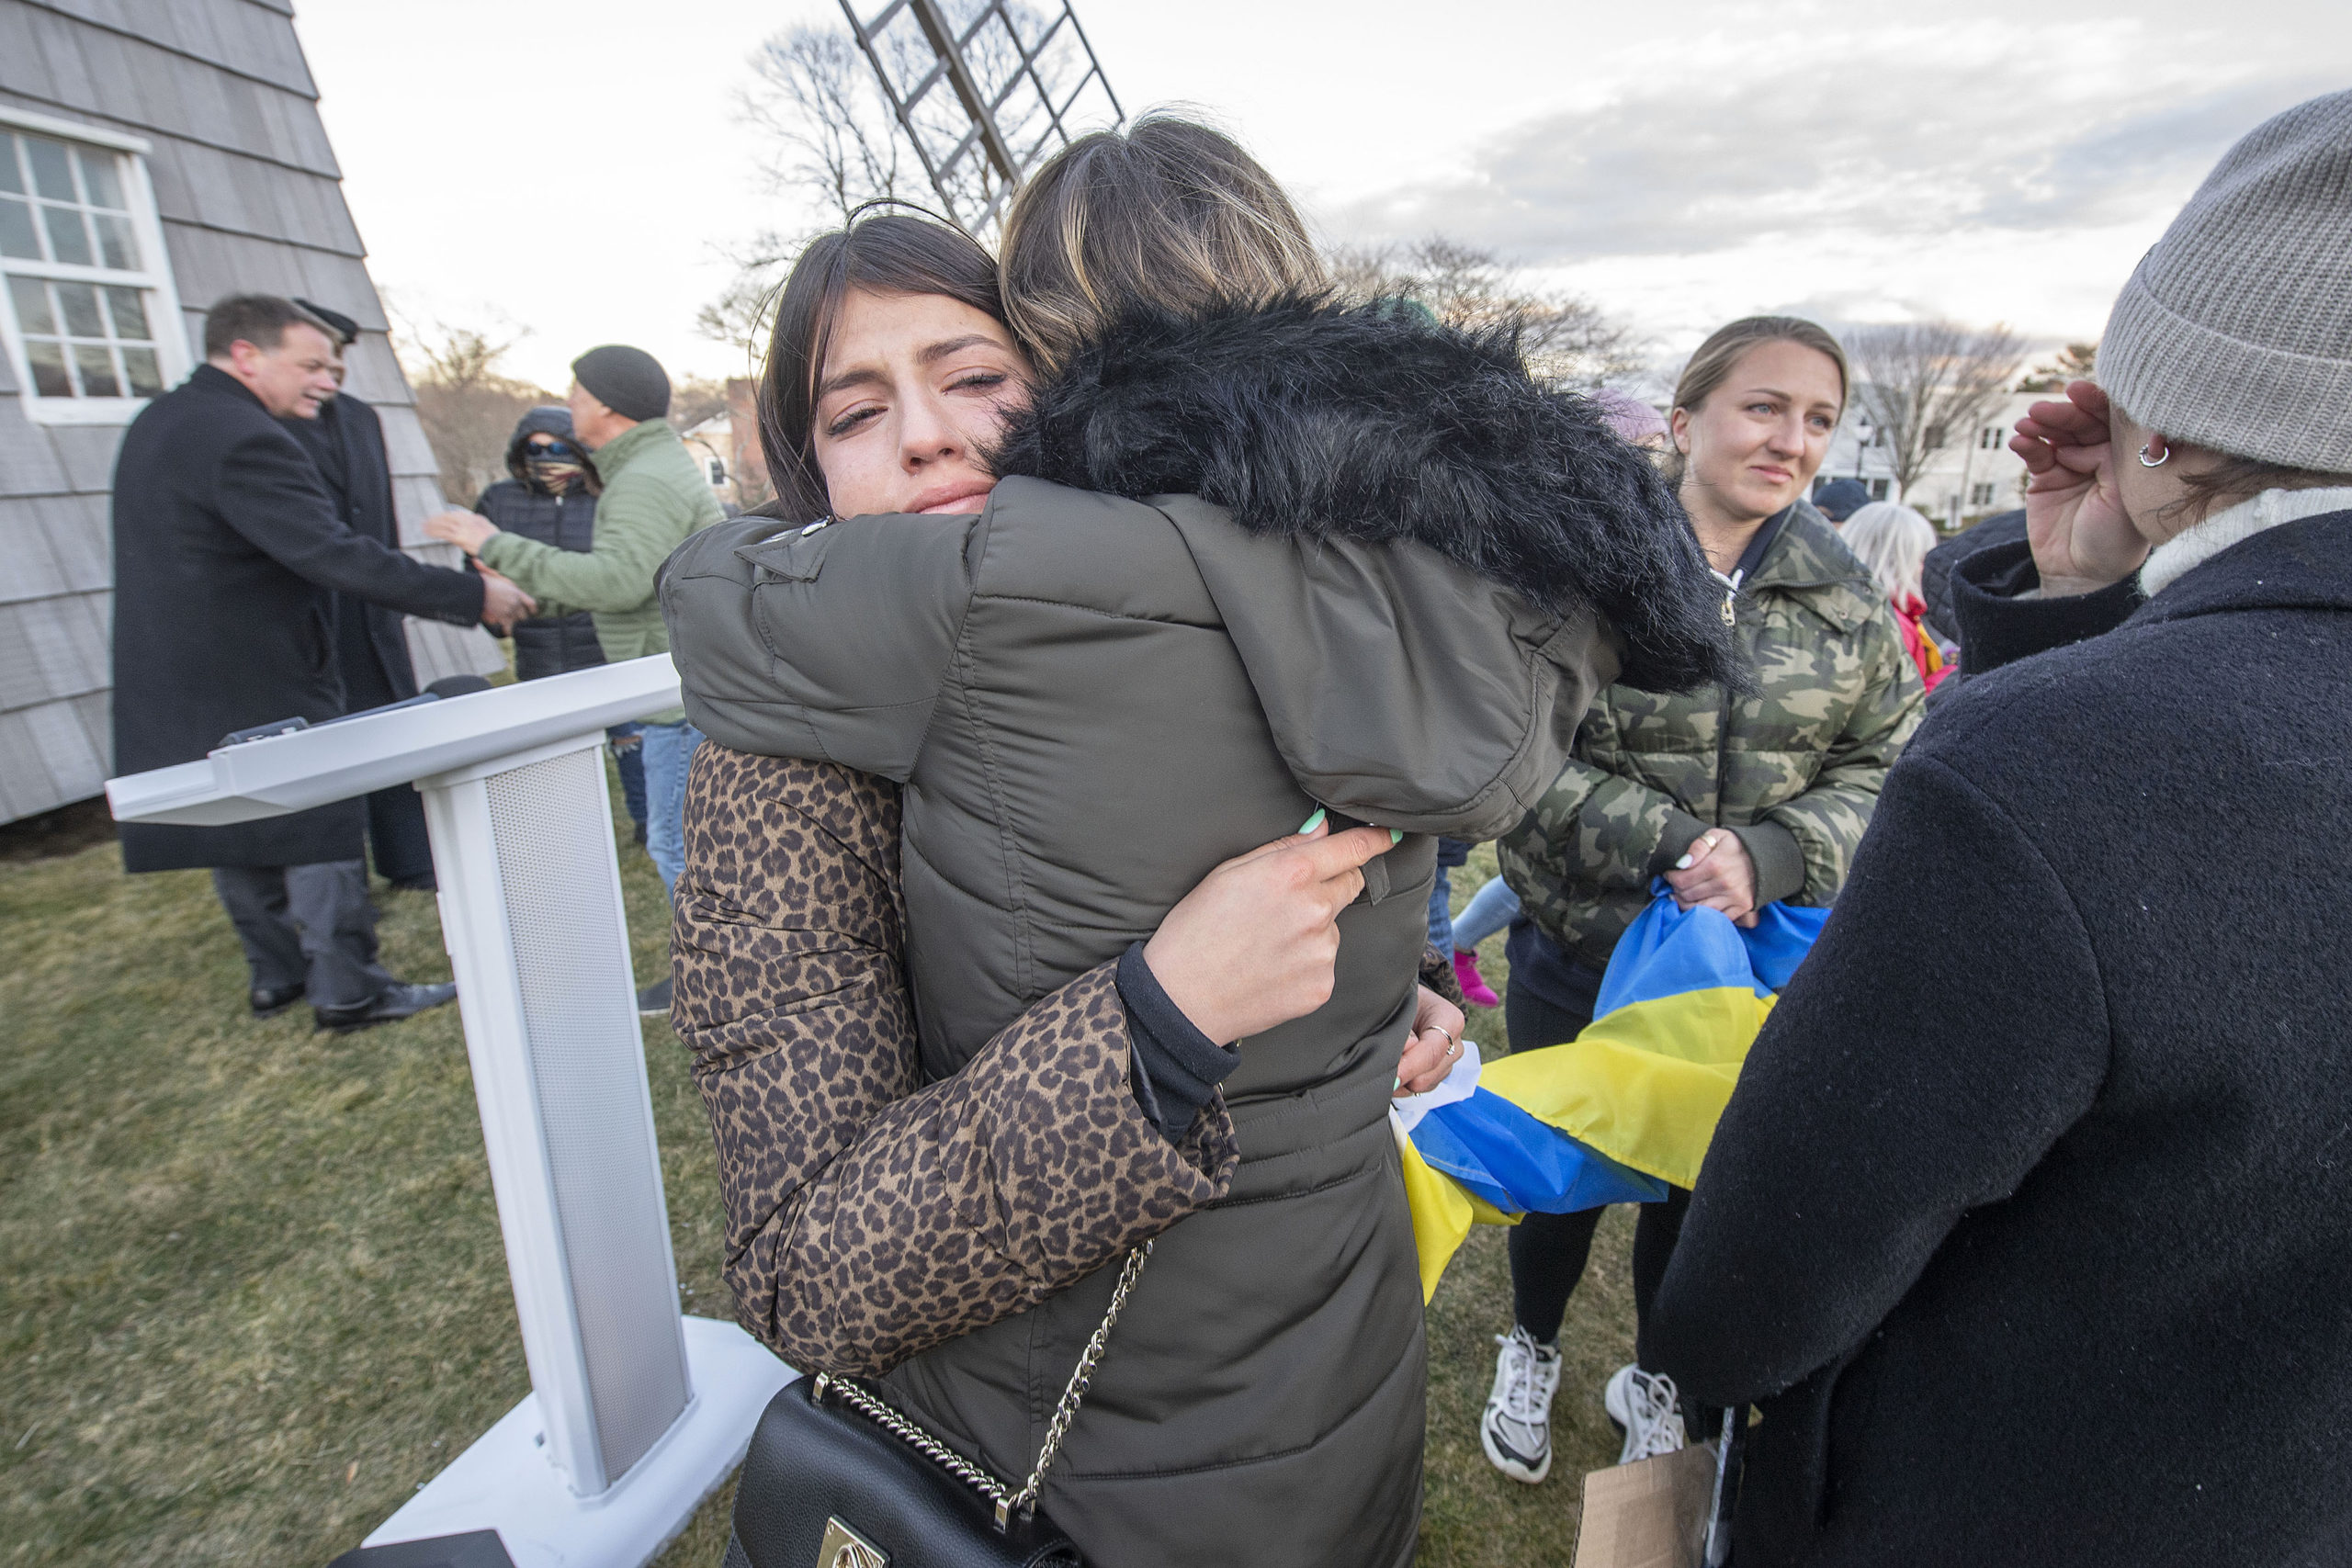 Vira Palamarchuk, whose father is fighting on the front lines in Ukraine, is comforted by a complete stranger during a rally last Thursday on the Hook Mill Village Green in East Hampton. MICHAEL HELLER